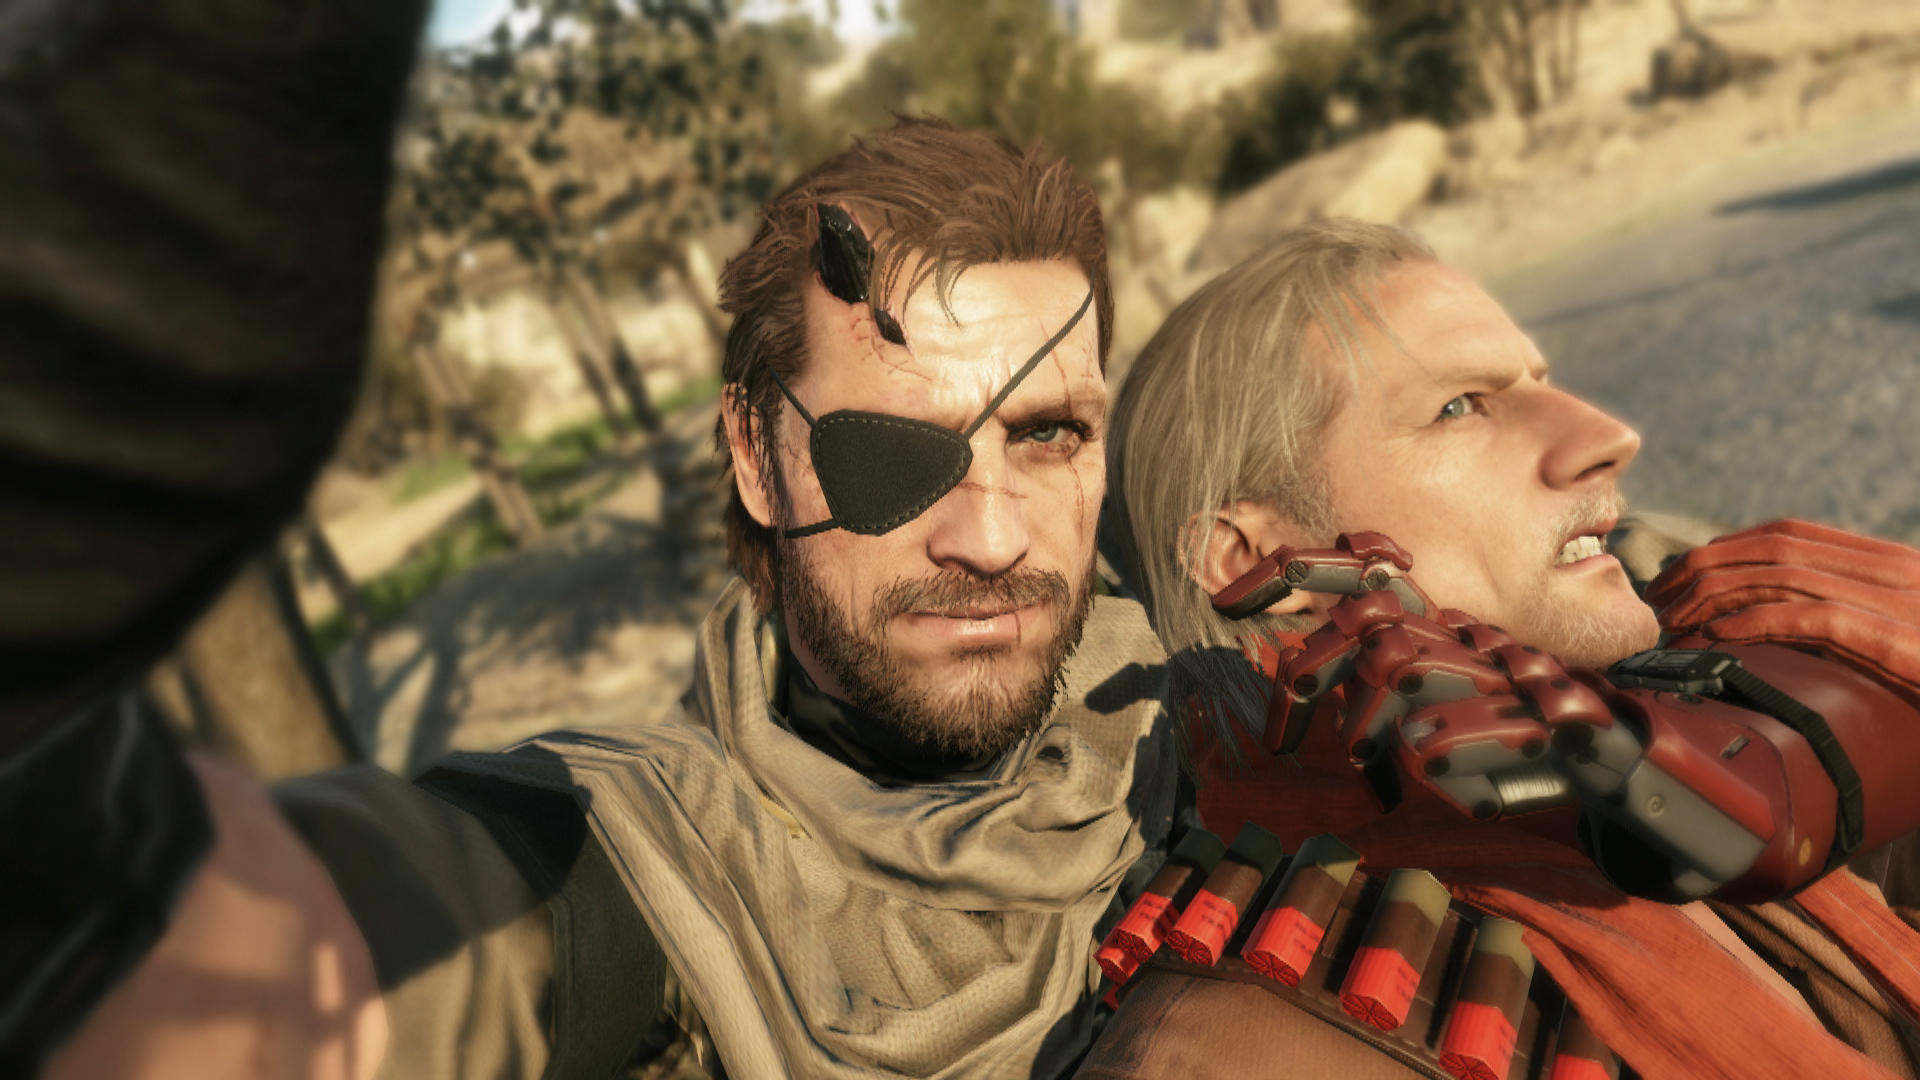 Metal Gear Solid V The Phantom Pain Solid Snake 1920x1080